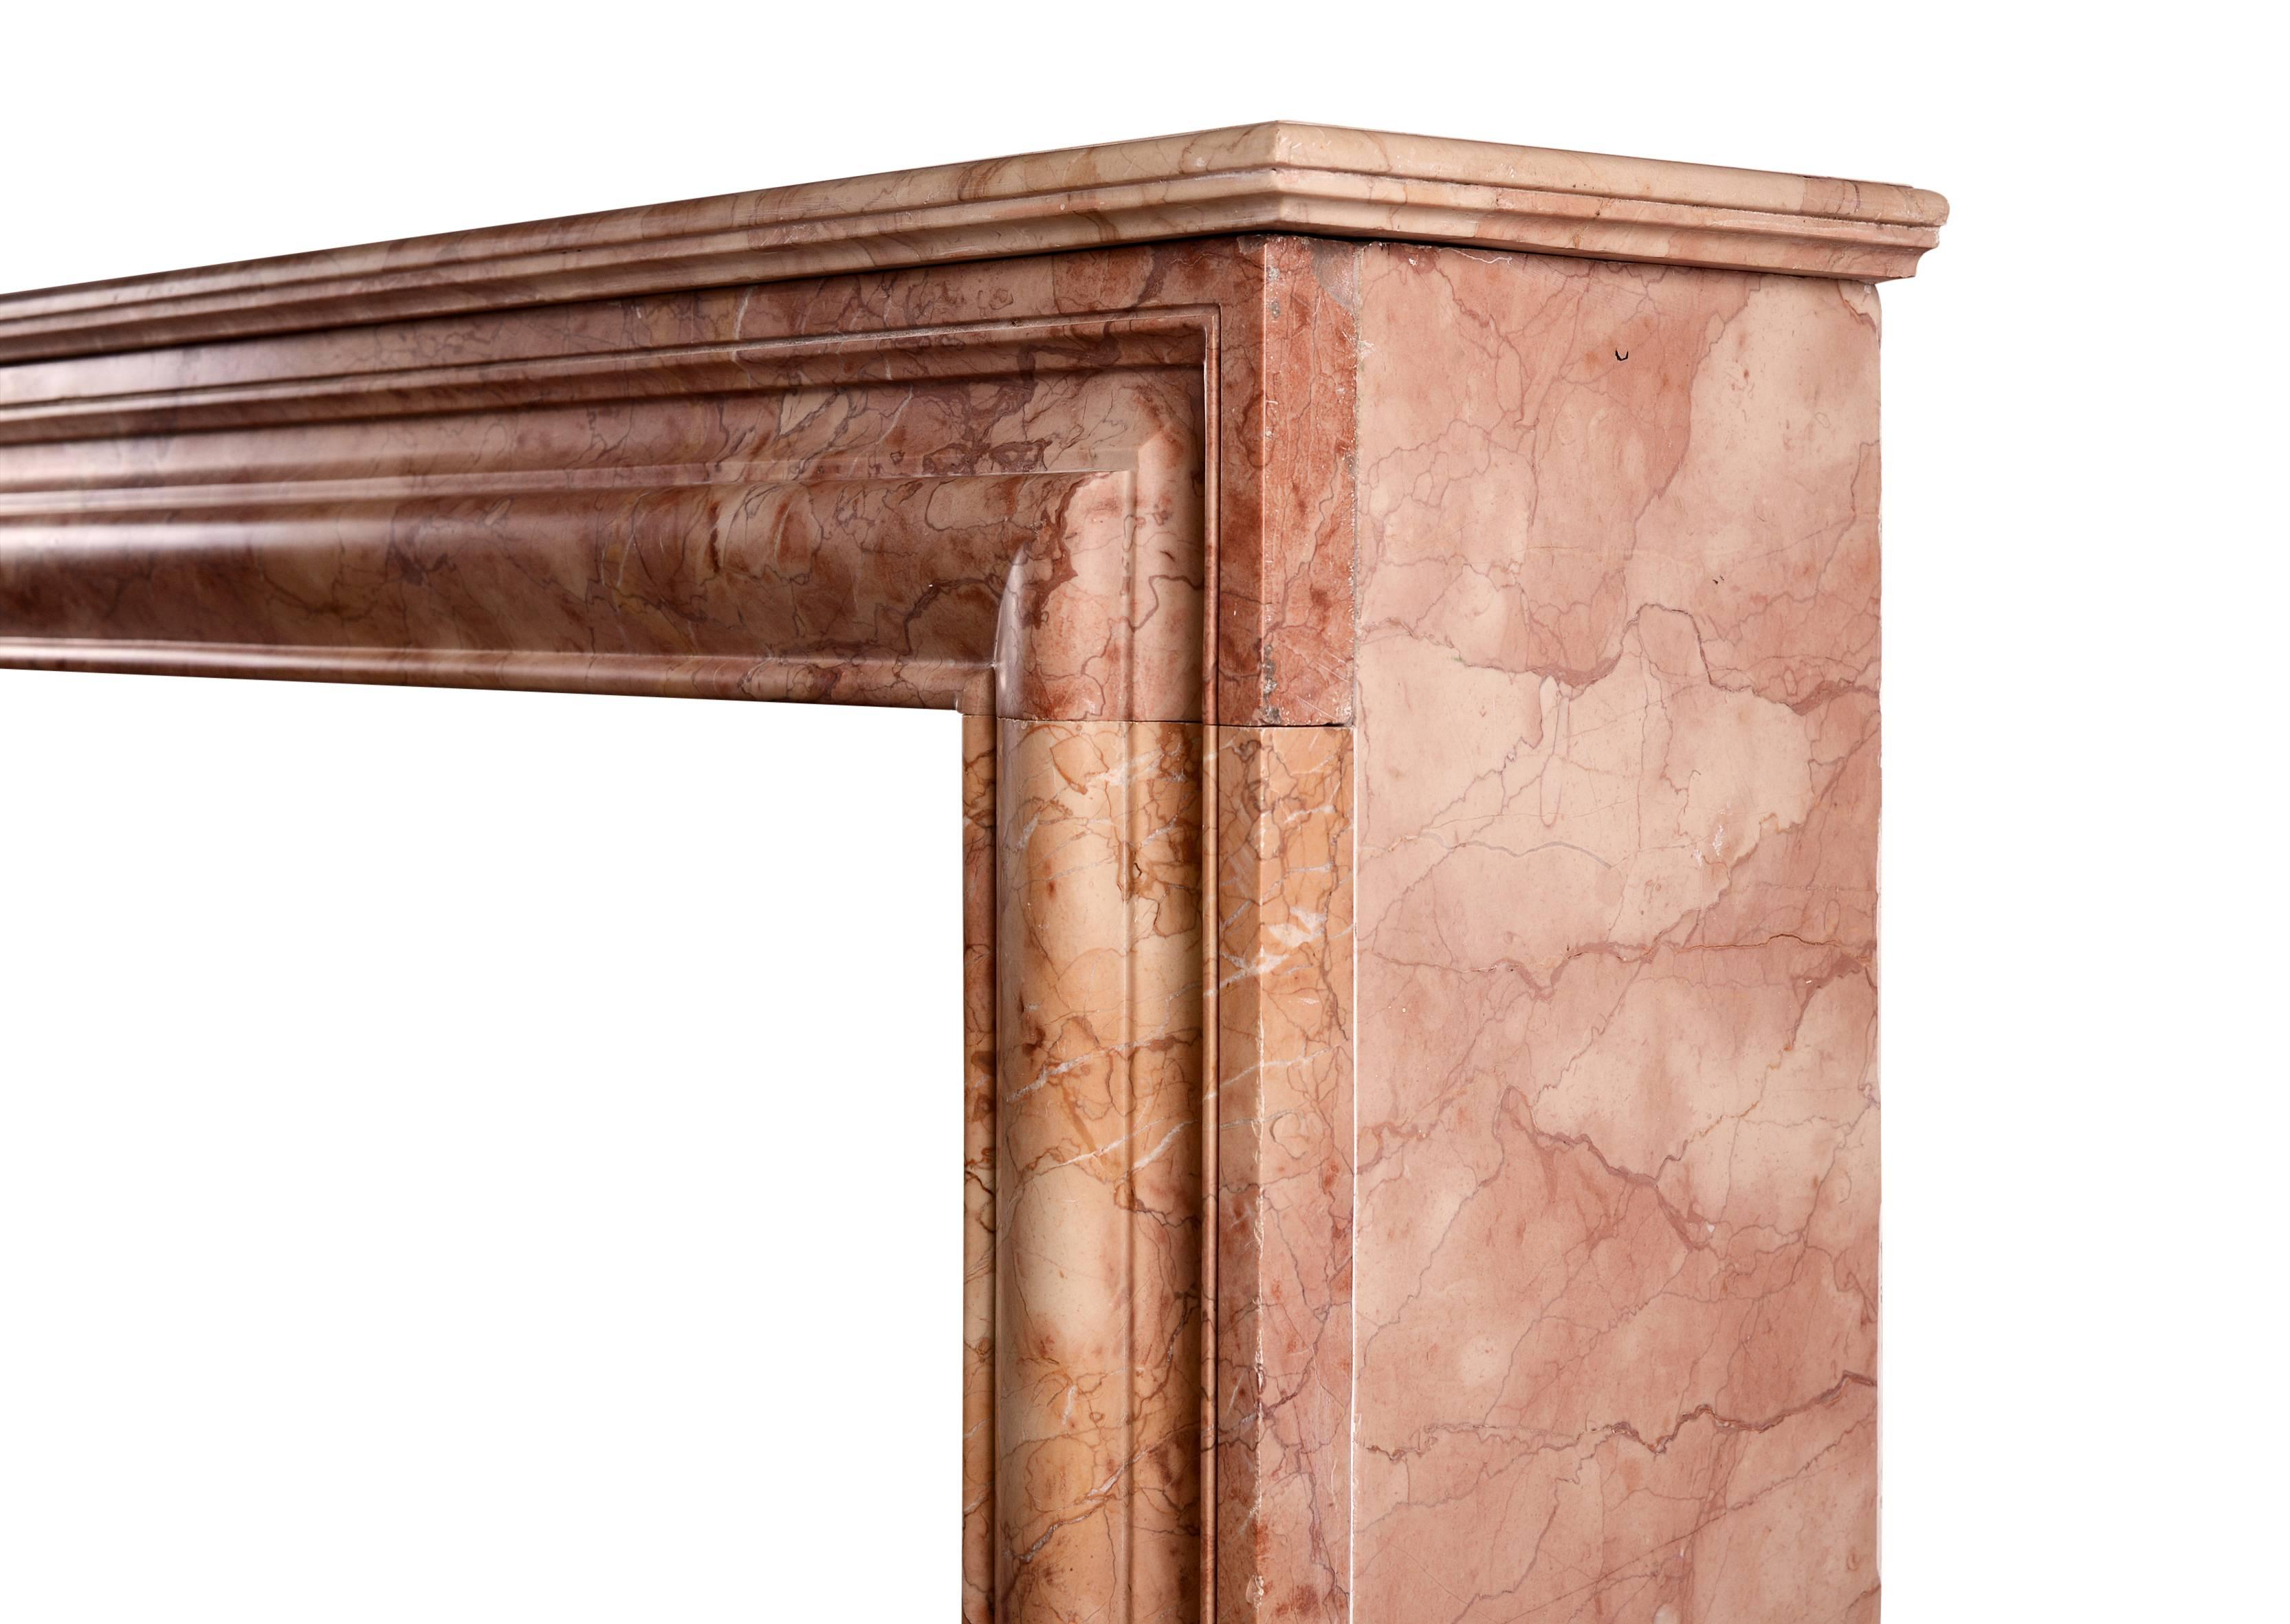 Napoleon III Architectural Fireplace in Rosso Verona Marble